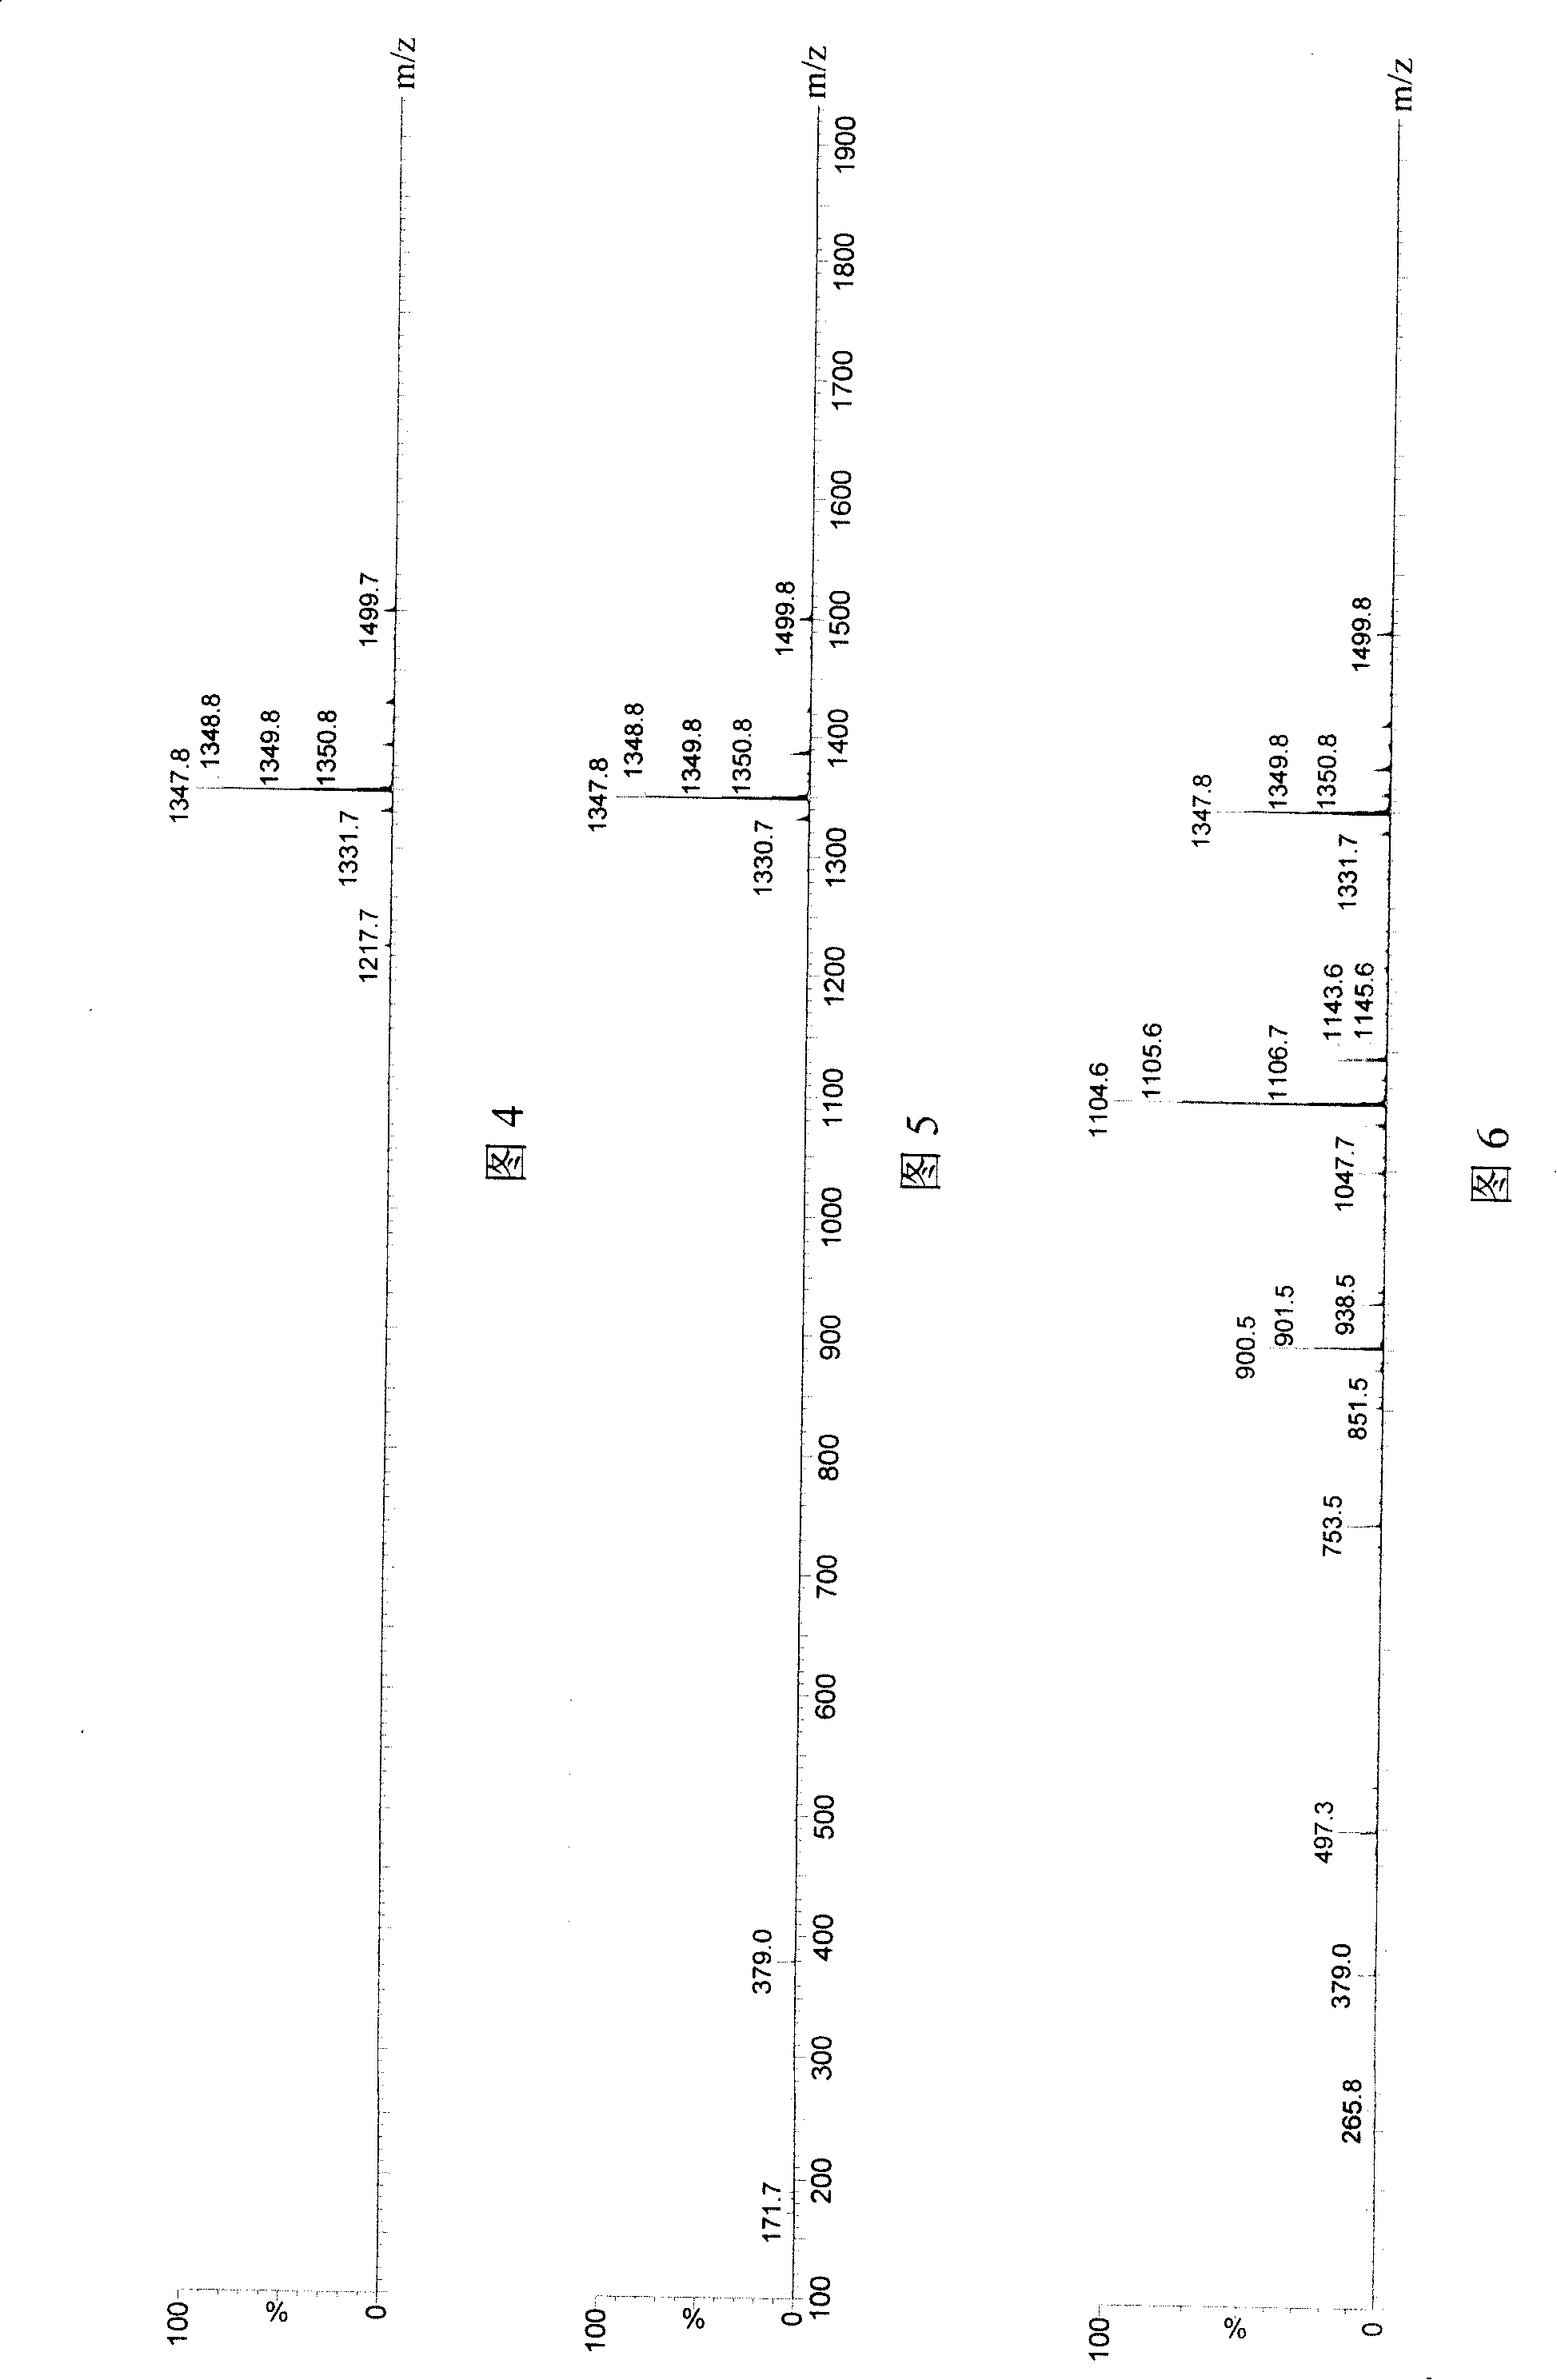 Application of cholinesterase in antagonistic tachykinin medicine